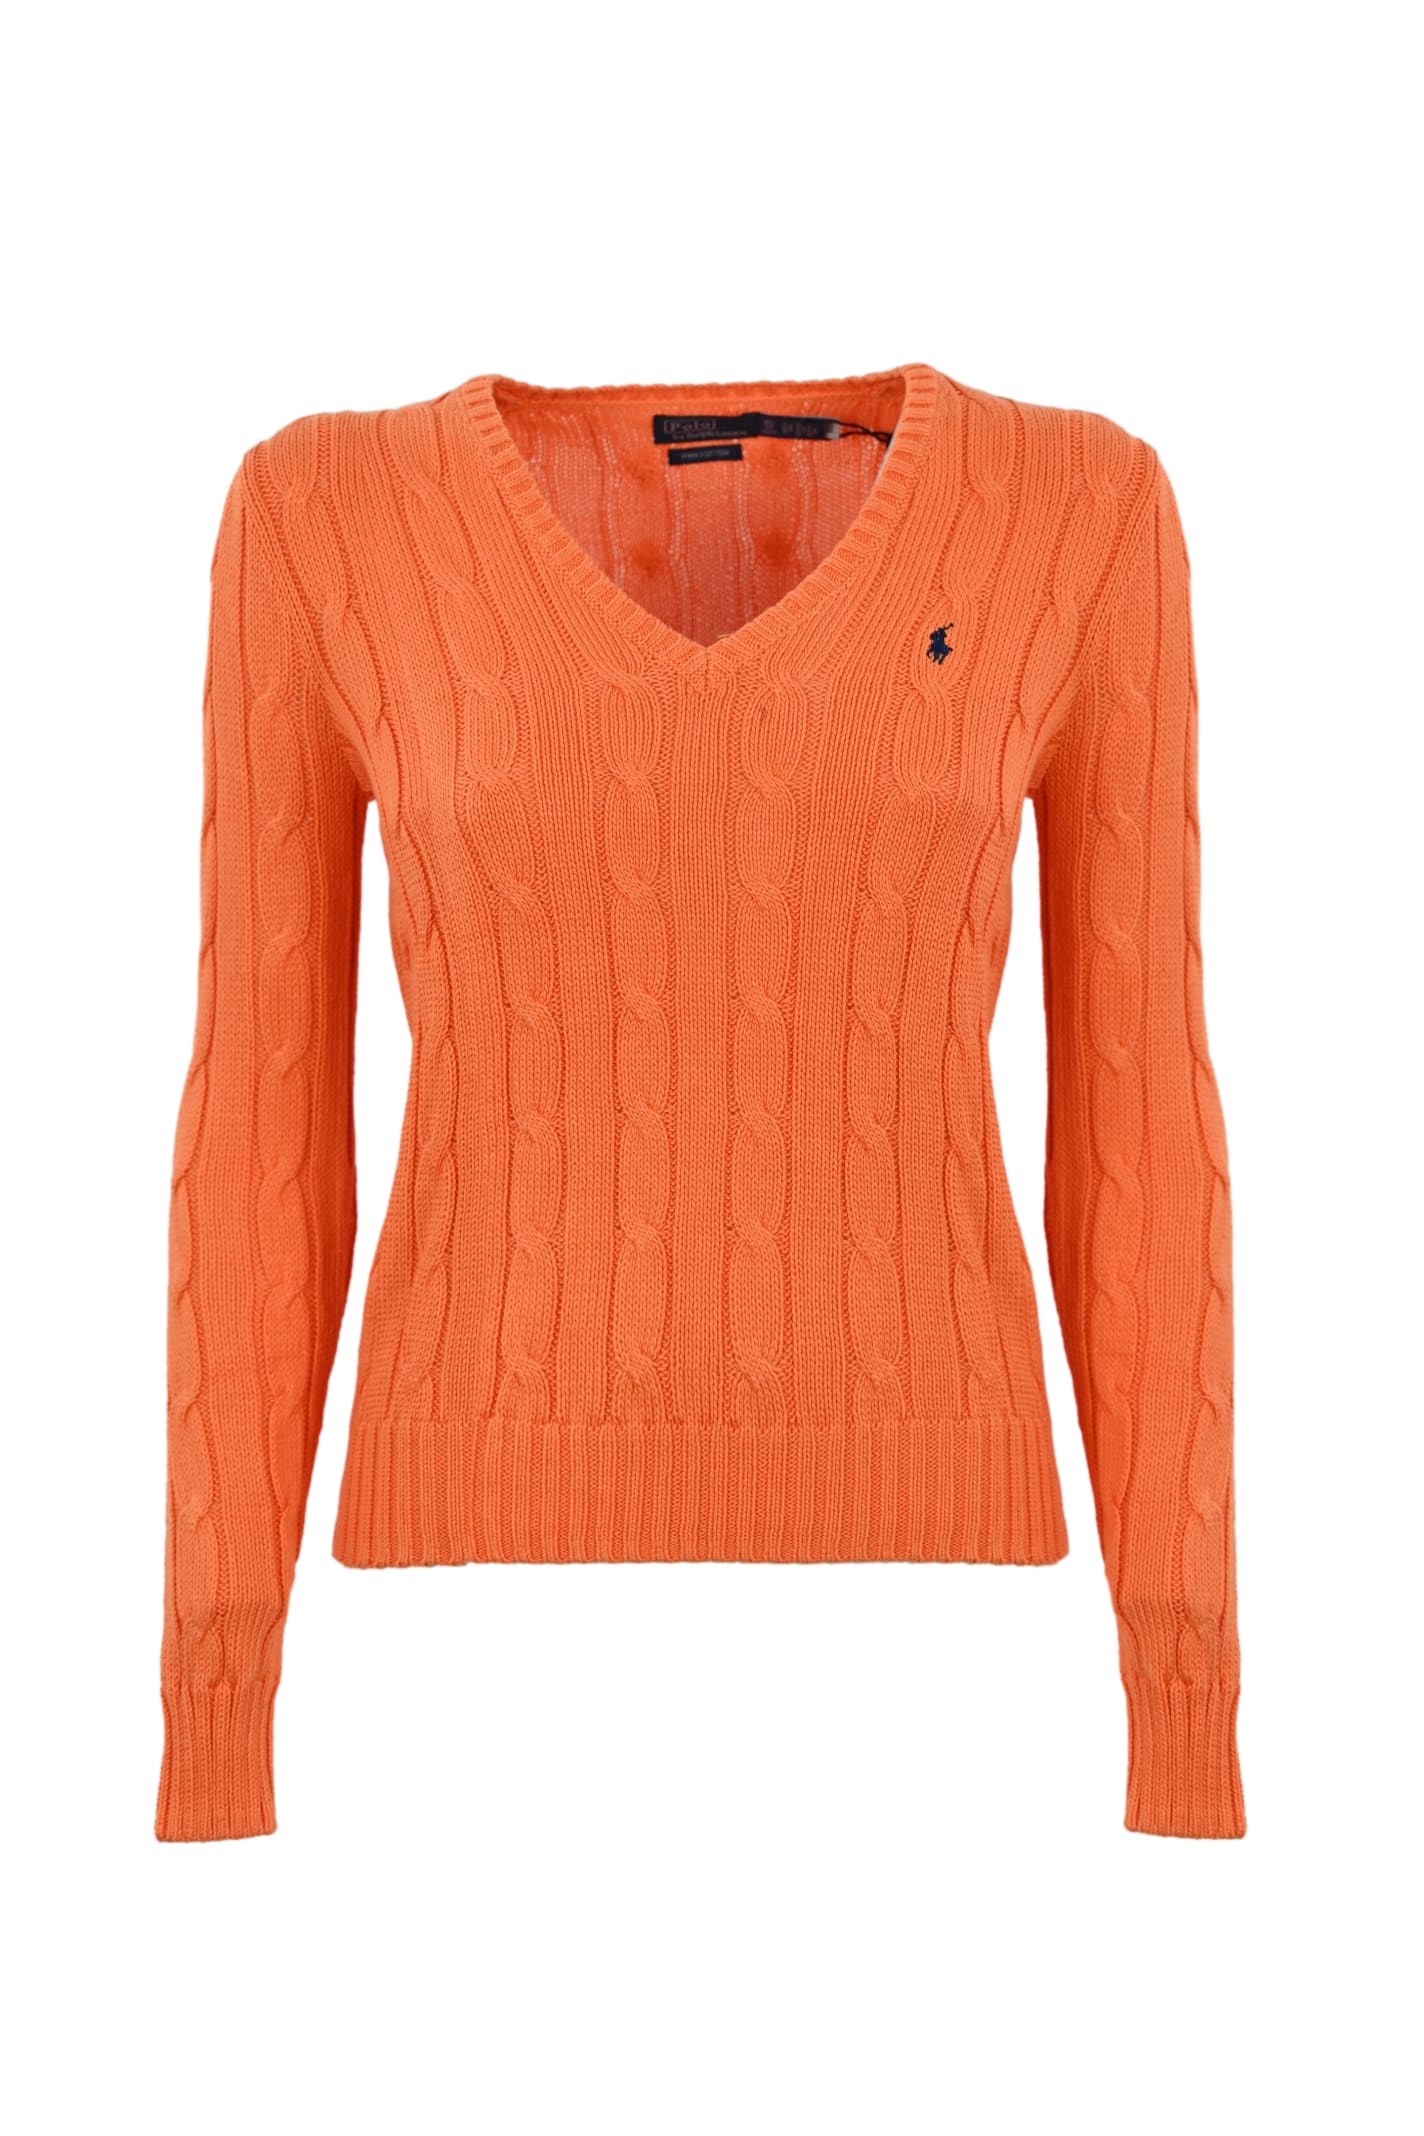 POLO RALPH LAUREN CABLE KNIT SWEATER WITH V-NECK